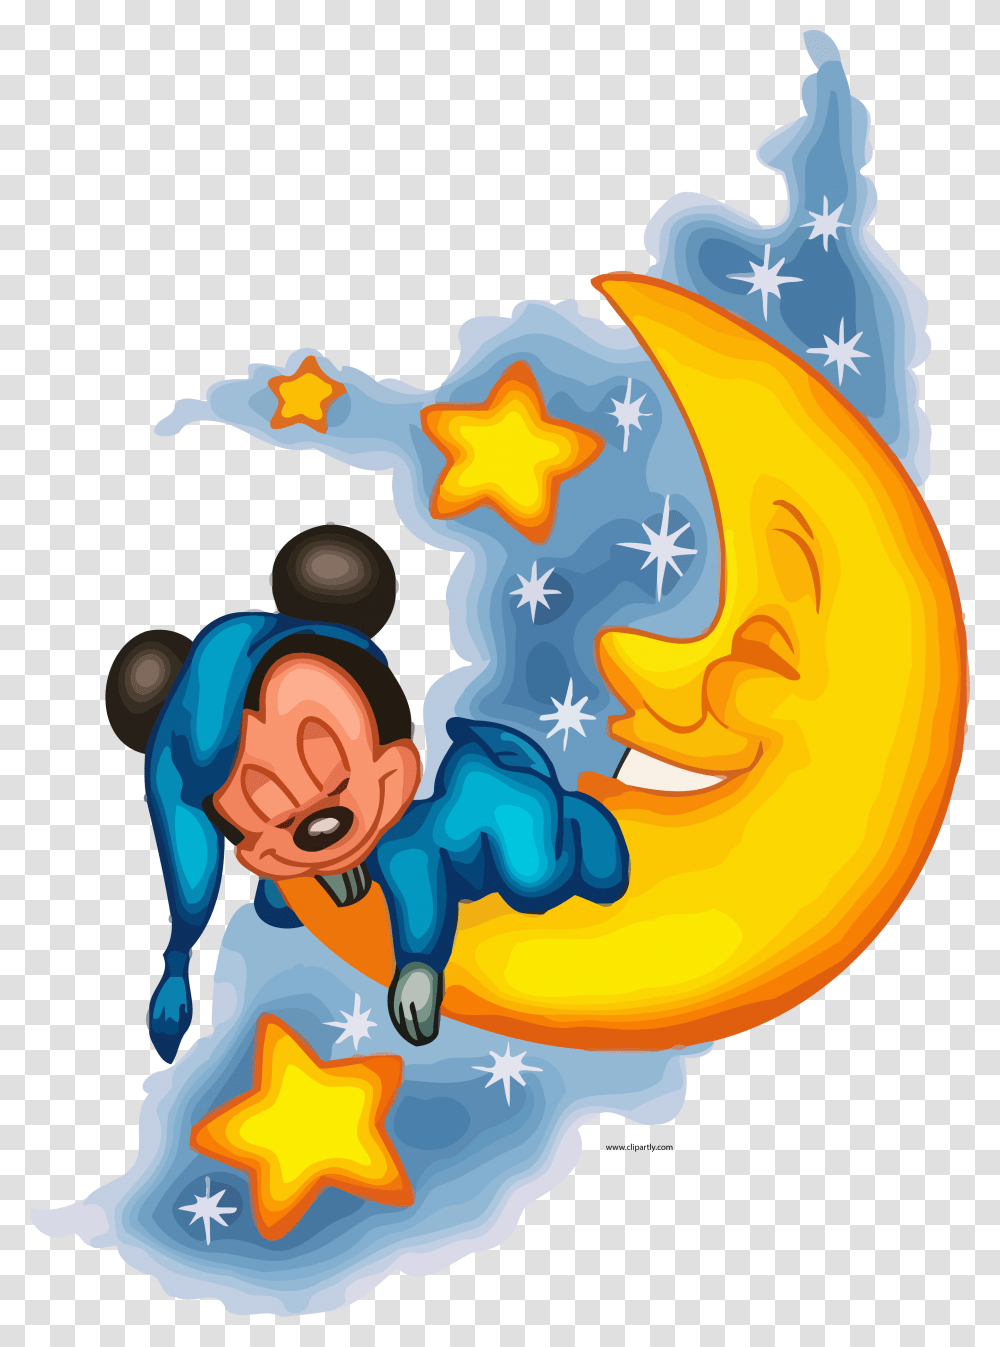 Baby Mickey Mouse And Friends Sleeping Clipart Sleeping Mickey Mouse, Star Symbol Transparent Png